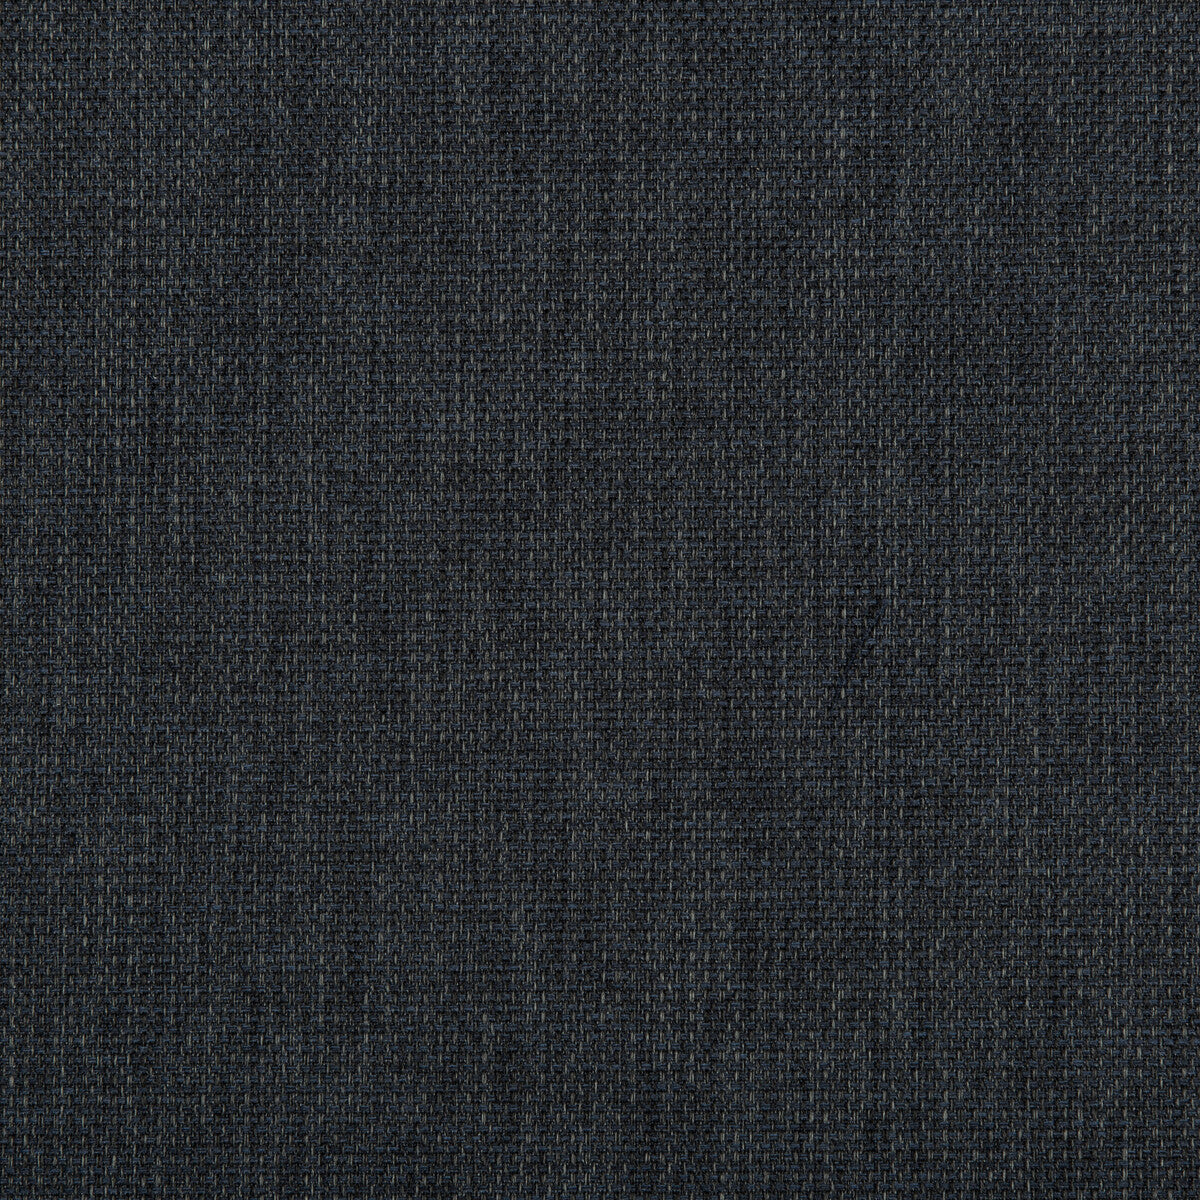 Kravet Contract fabric in 4645-521 color - pattern 4645.521.0 - by Kravet Contract